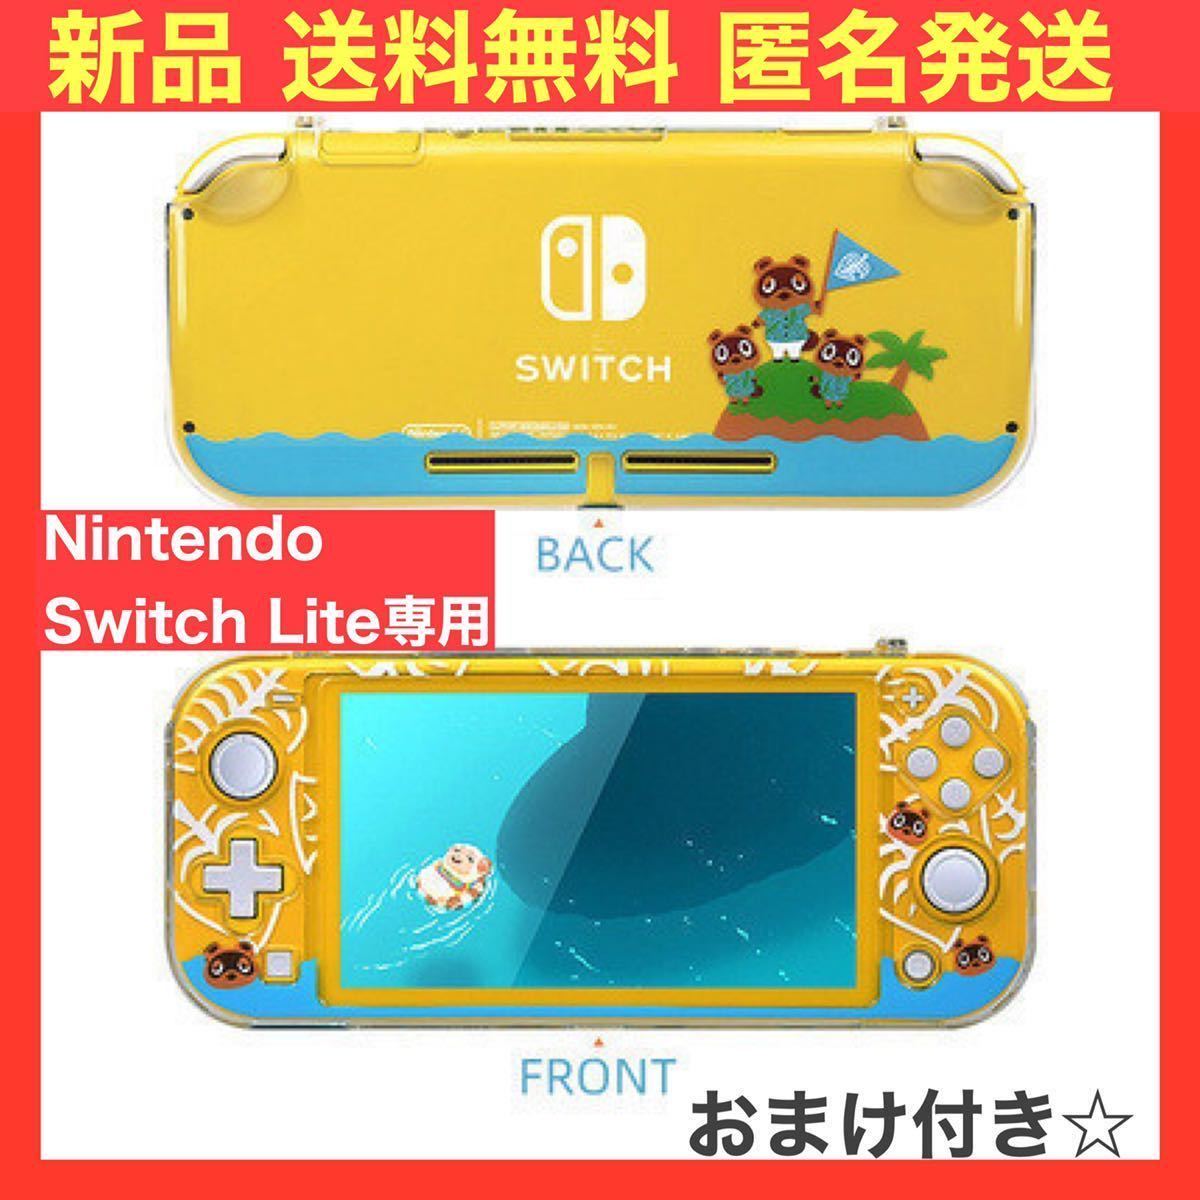 PayPayフリマ｜桃鉄 あつ森 Switchソフト